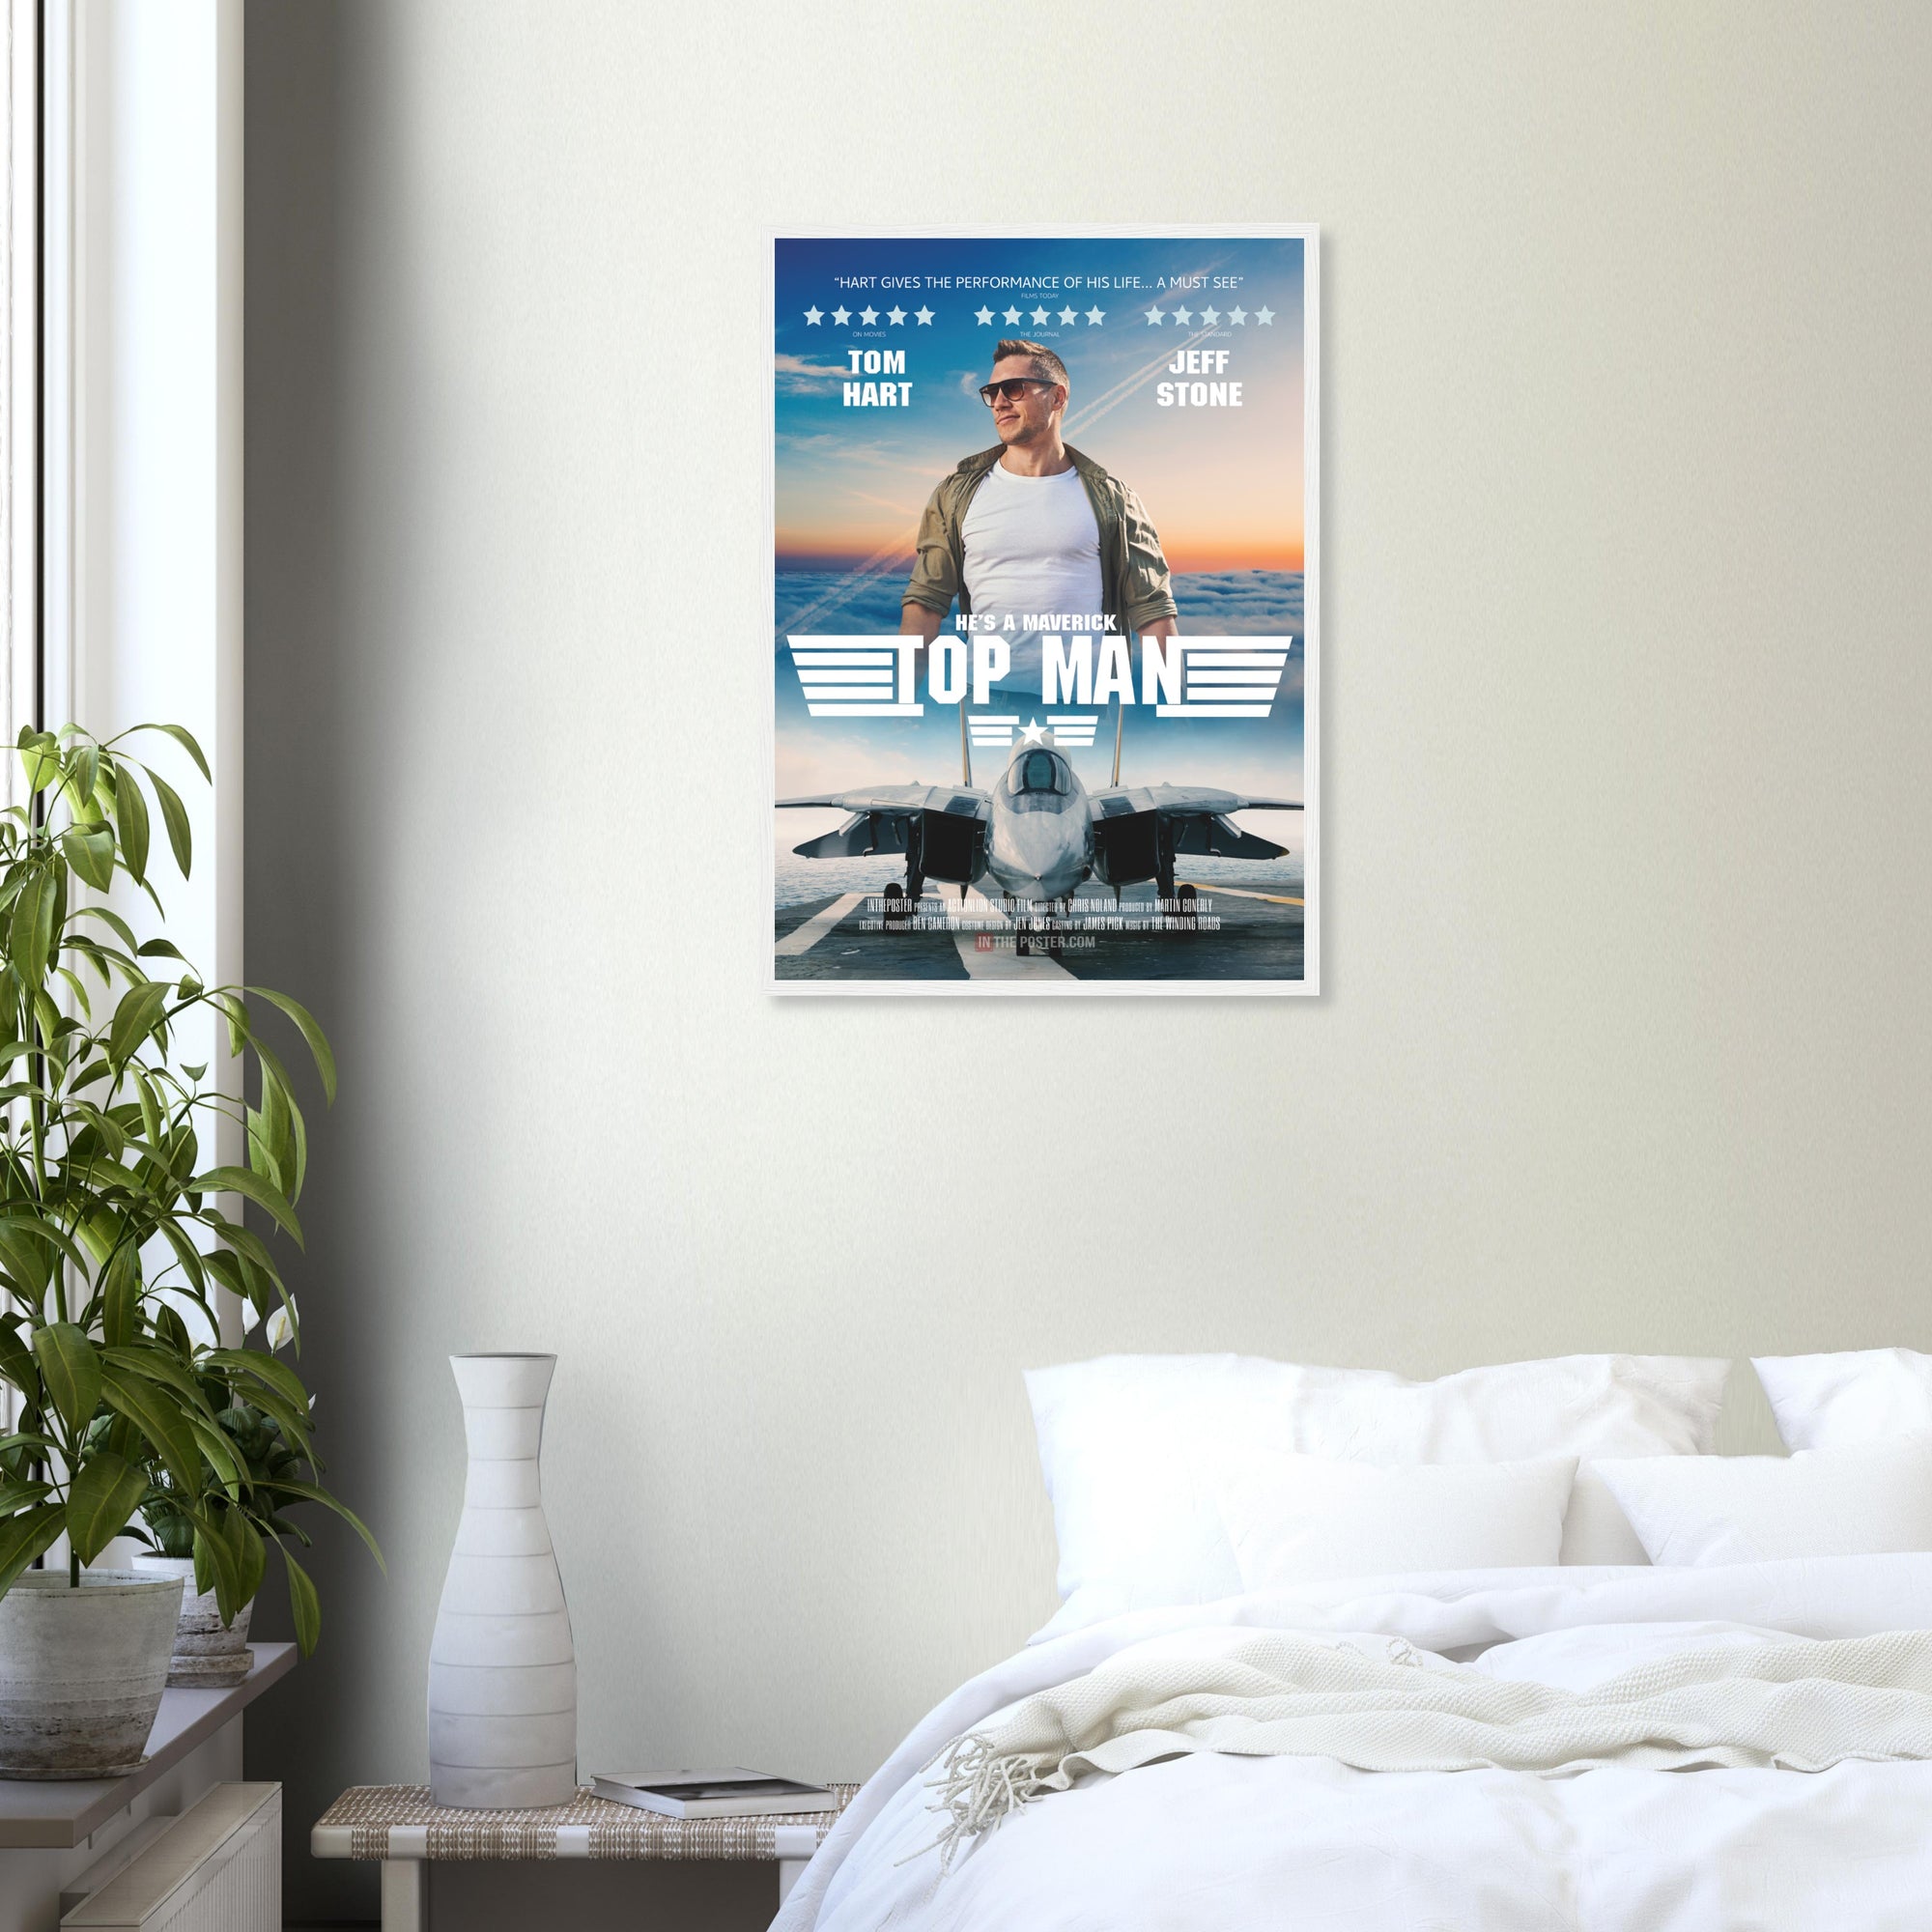 A fighter jet movie poster in regular size and a white frame, on a grey wall above a bed and green house plant